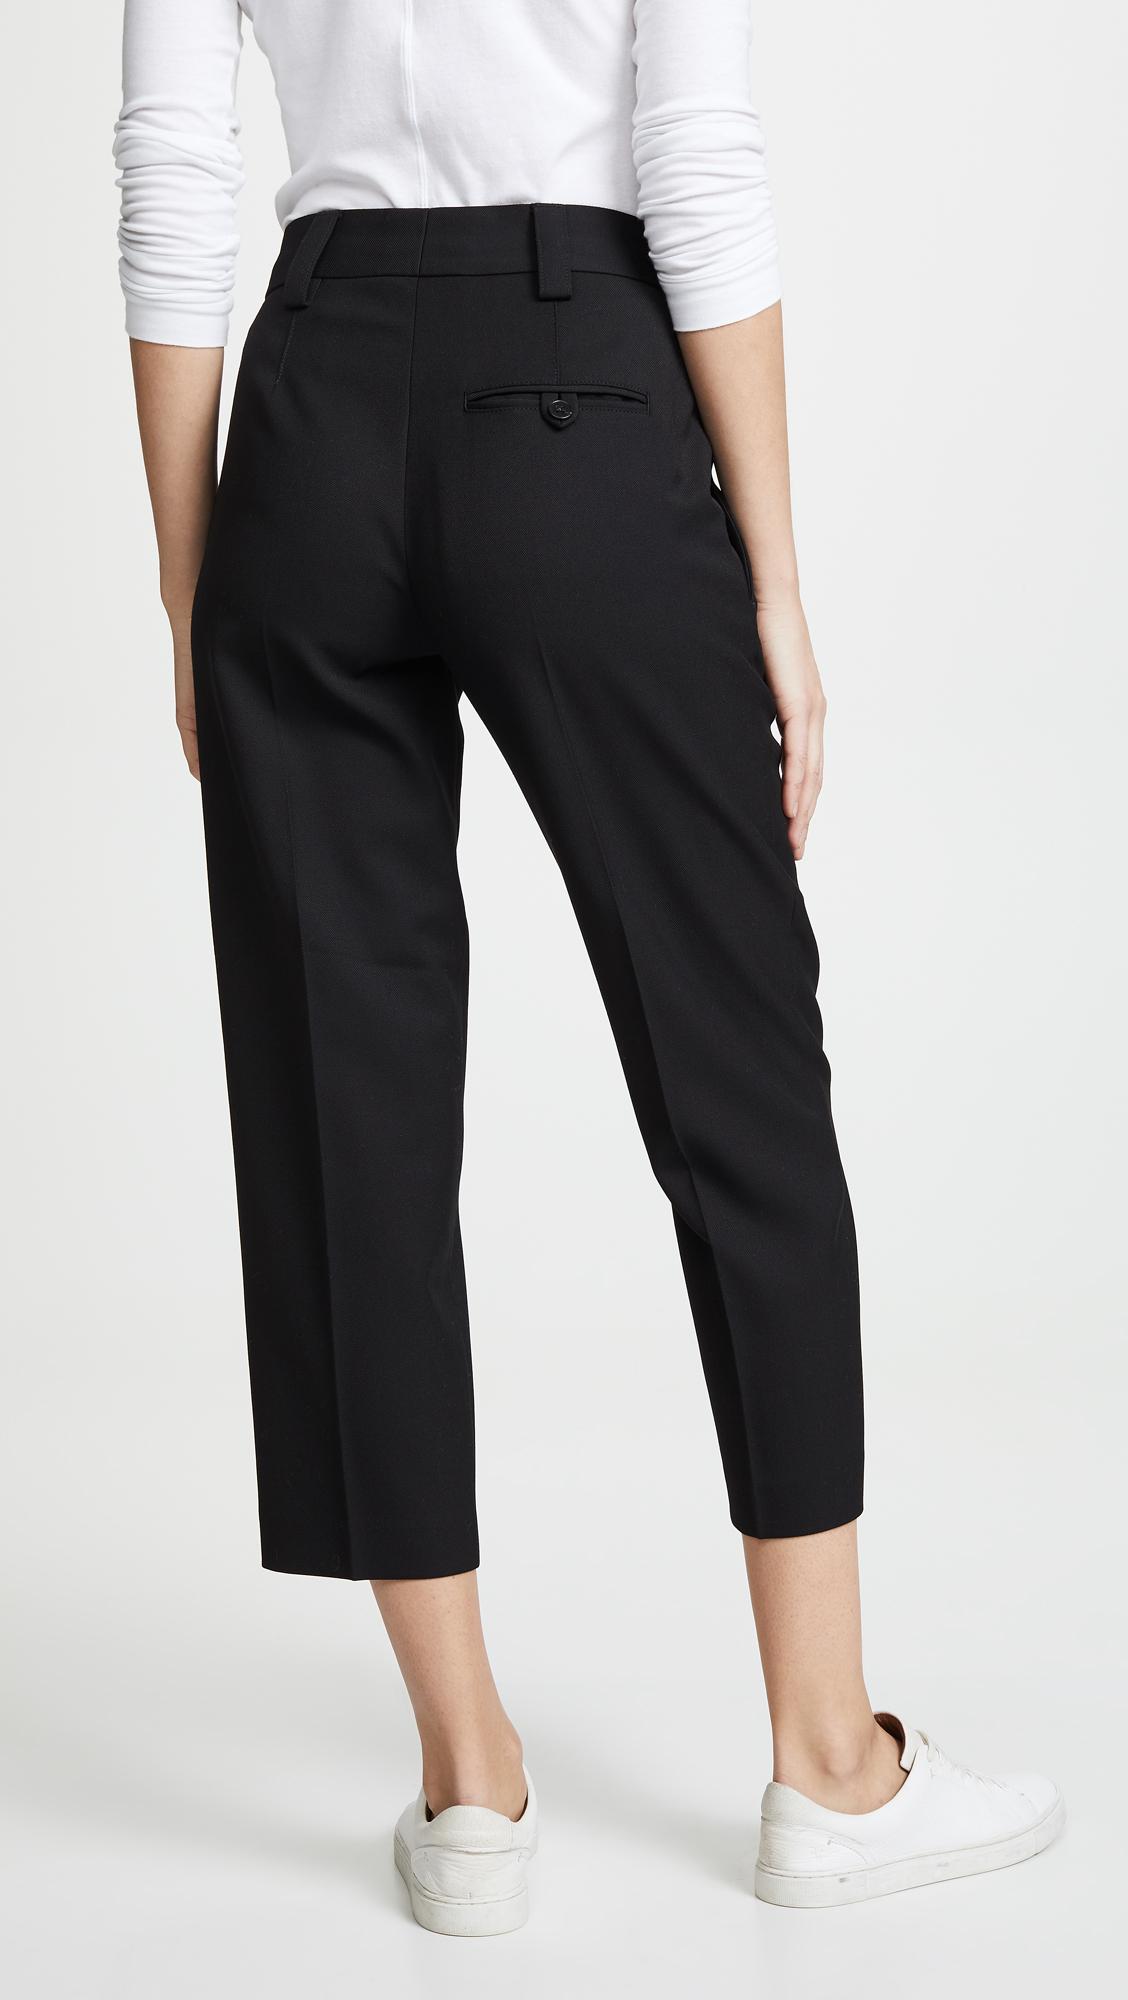 Acne Studios Synthetic Light Summer Trousers in Black - Lyst